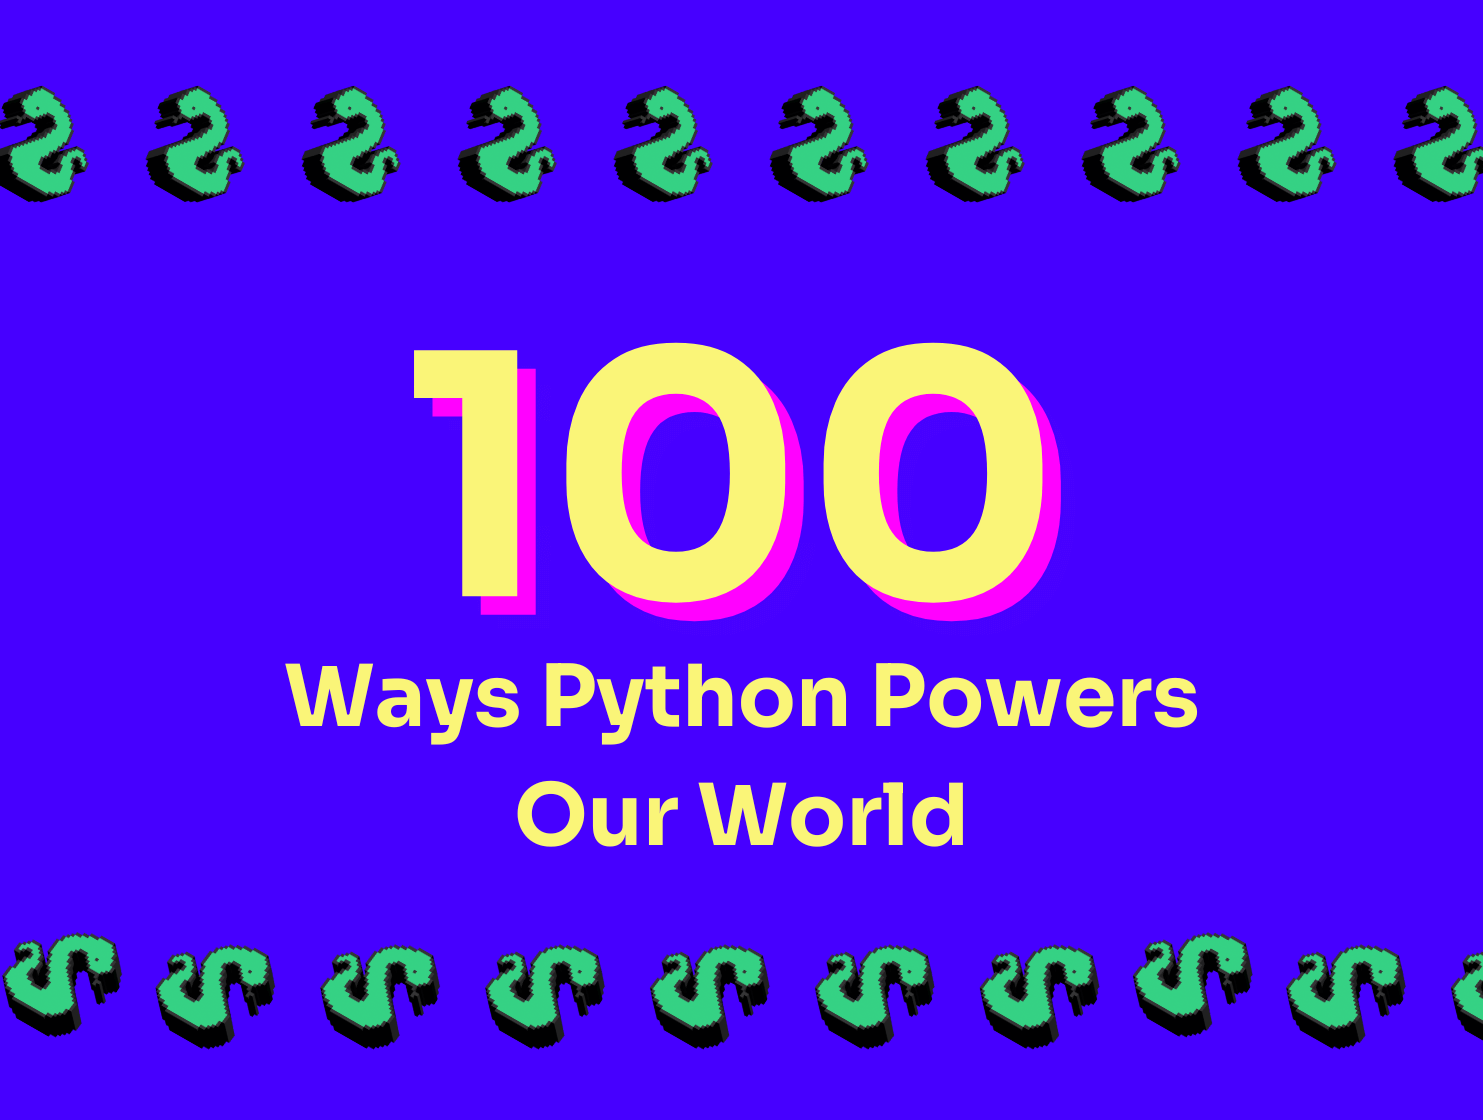 Why learn Python? 100 Ways Python Powers Our World